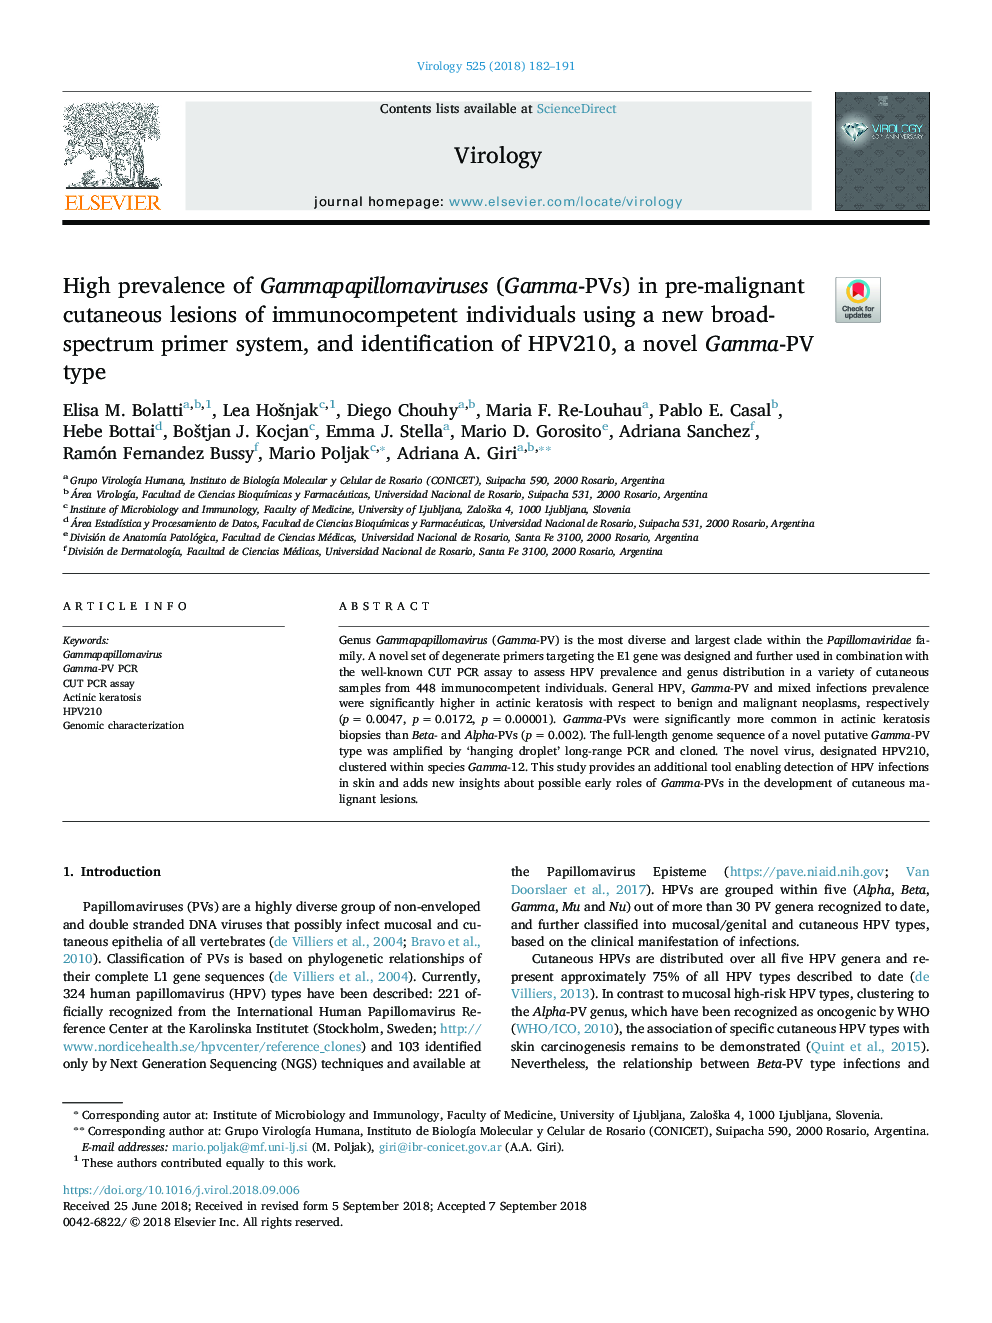 High prevalence of Gammapapillomaviruses (Gamma-PVs) in pre-malignant cutaneous lesions of immunocompetent individuals using a new broad-spectrum primer system, and identification of HPV210, a novel Gamma-PV type